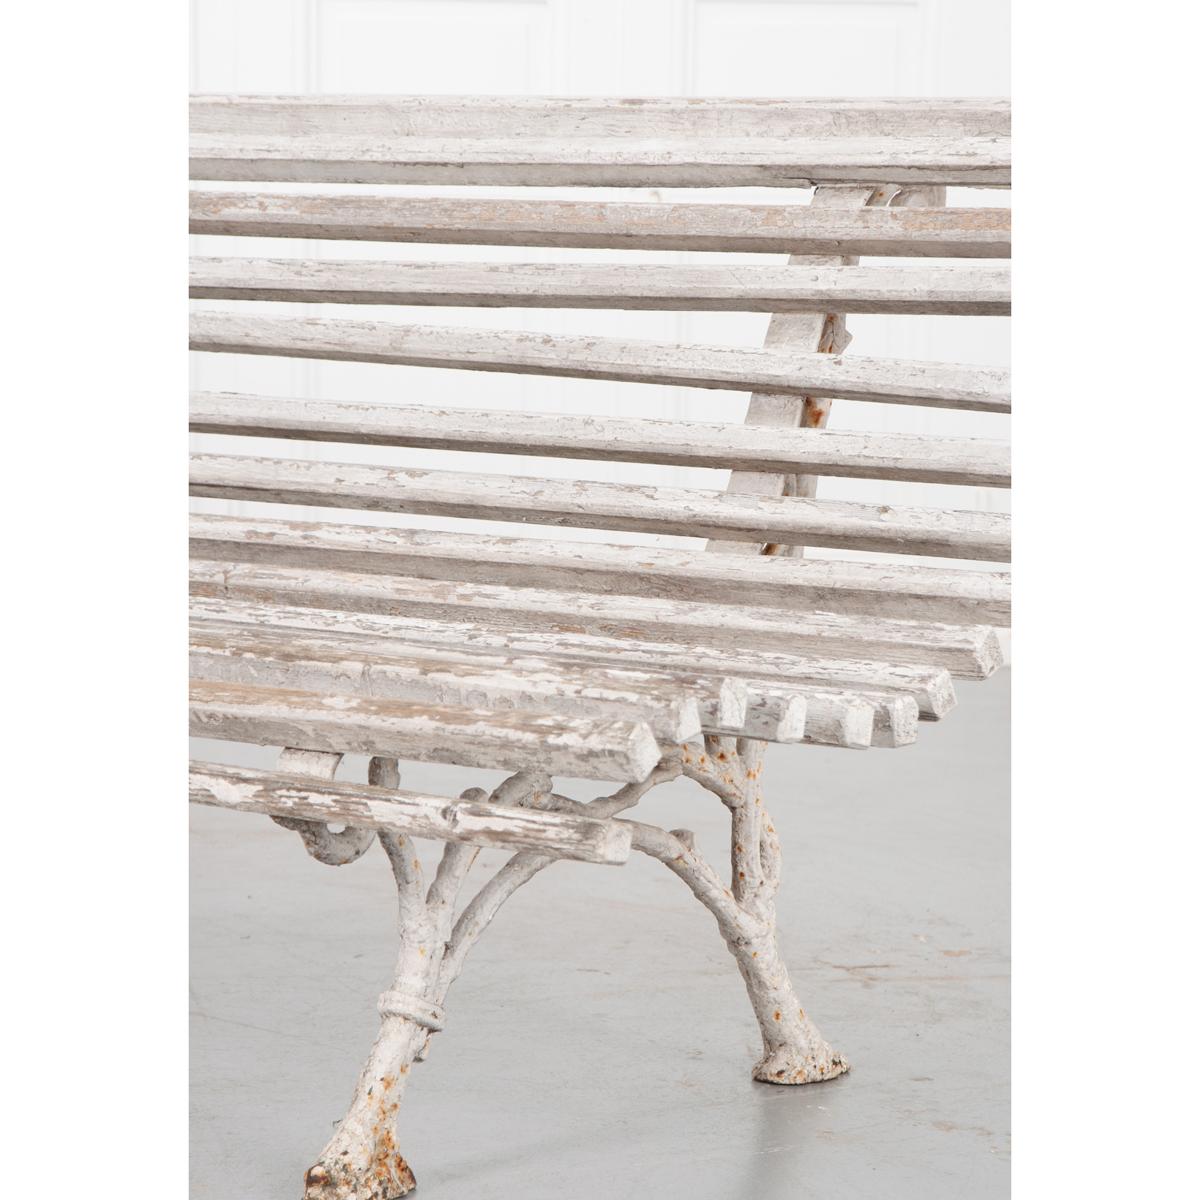 English 19th Century Iron & Wood Garden Bench For Sale 4